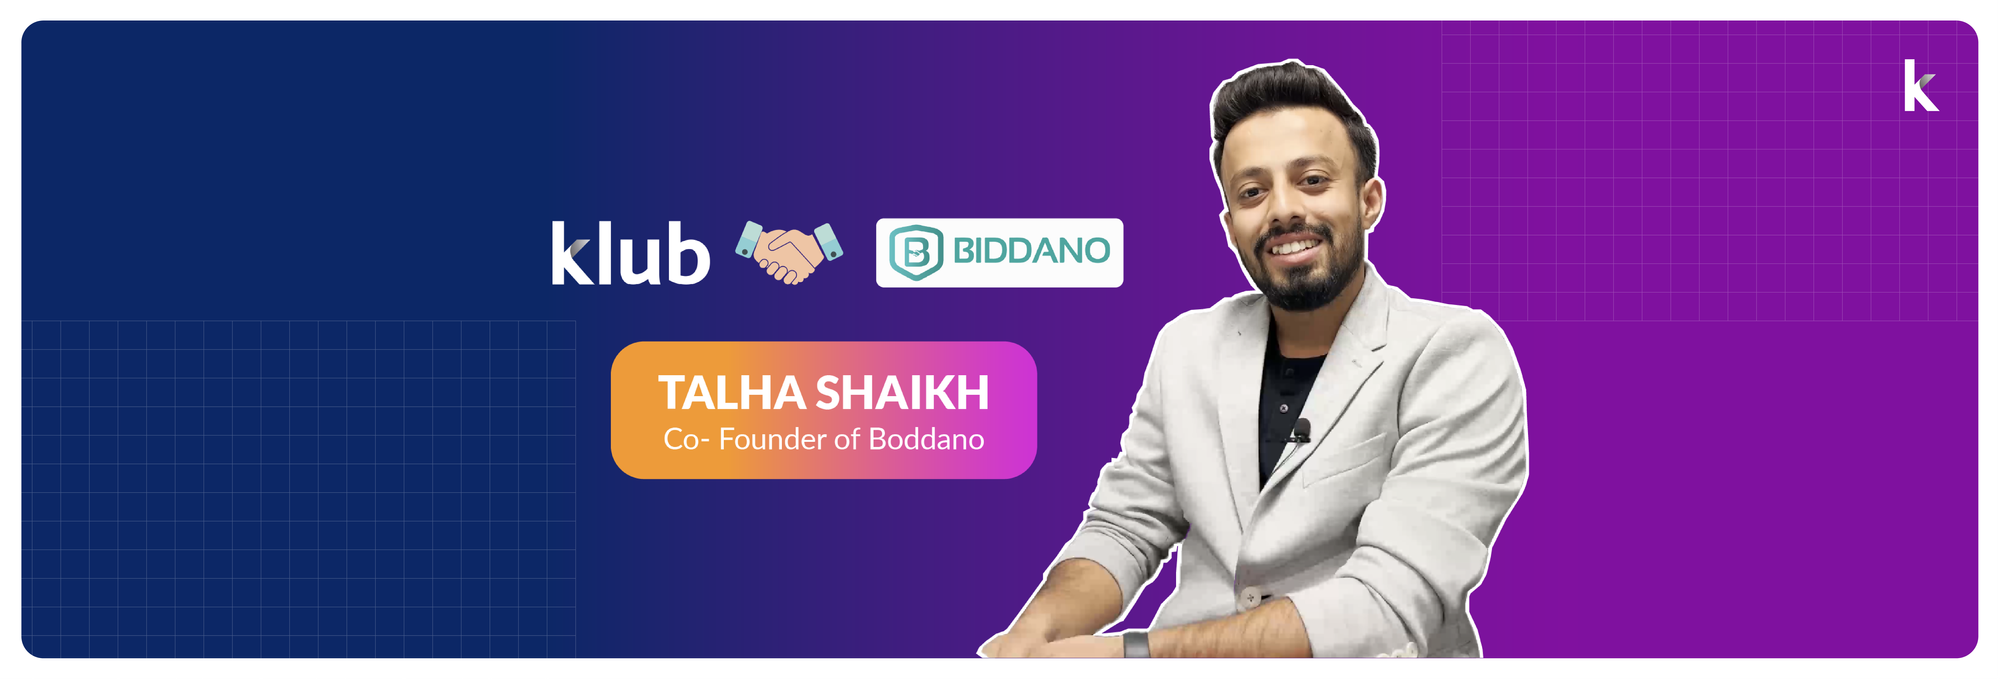 Unleashing the power of working capital: Biddano's growth story with Klub